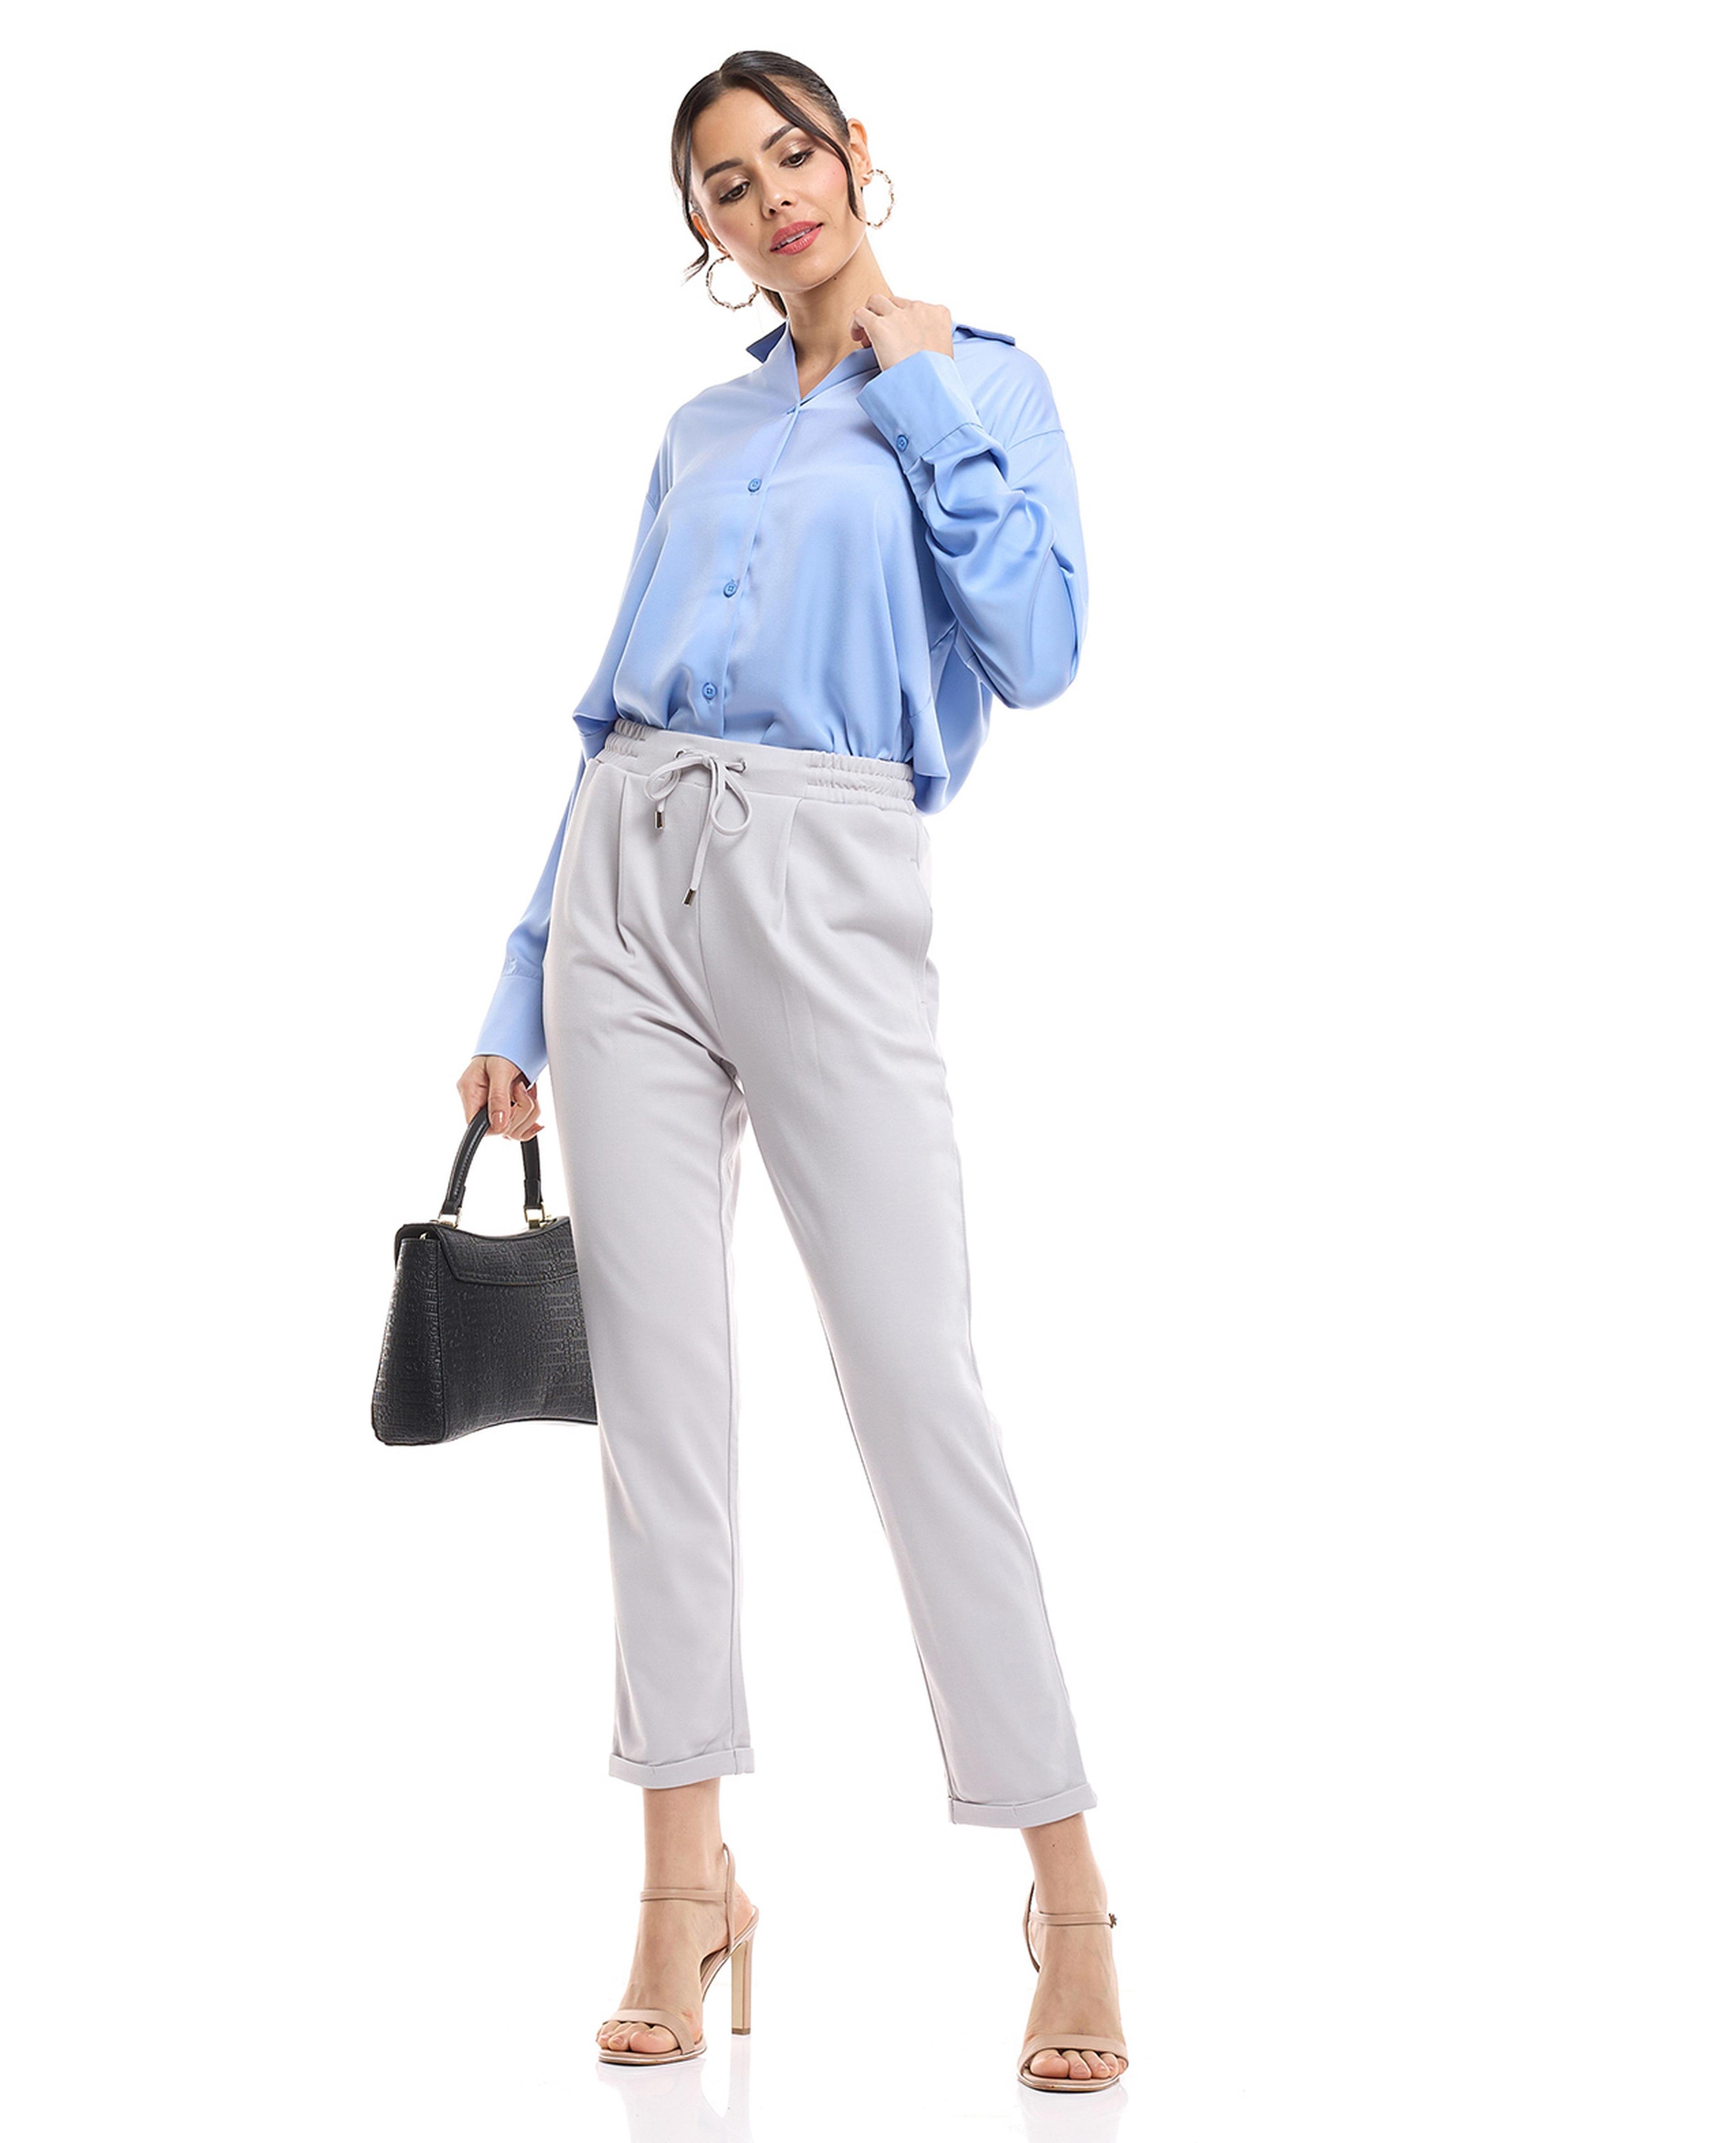 Solid Slim Fit Pants with Drawstring Waist